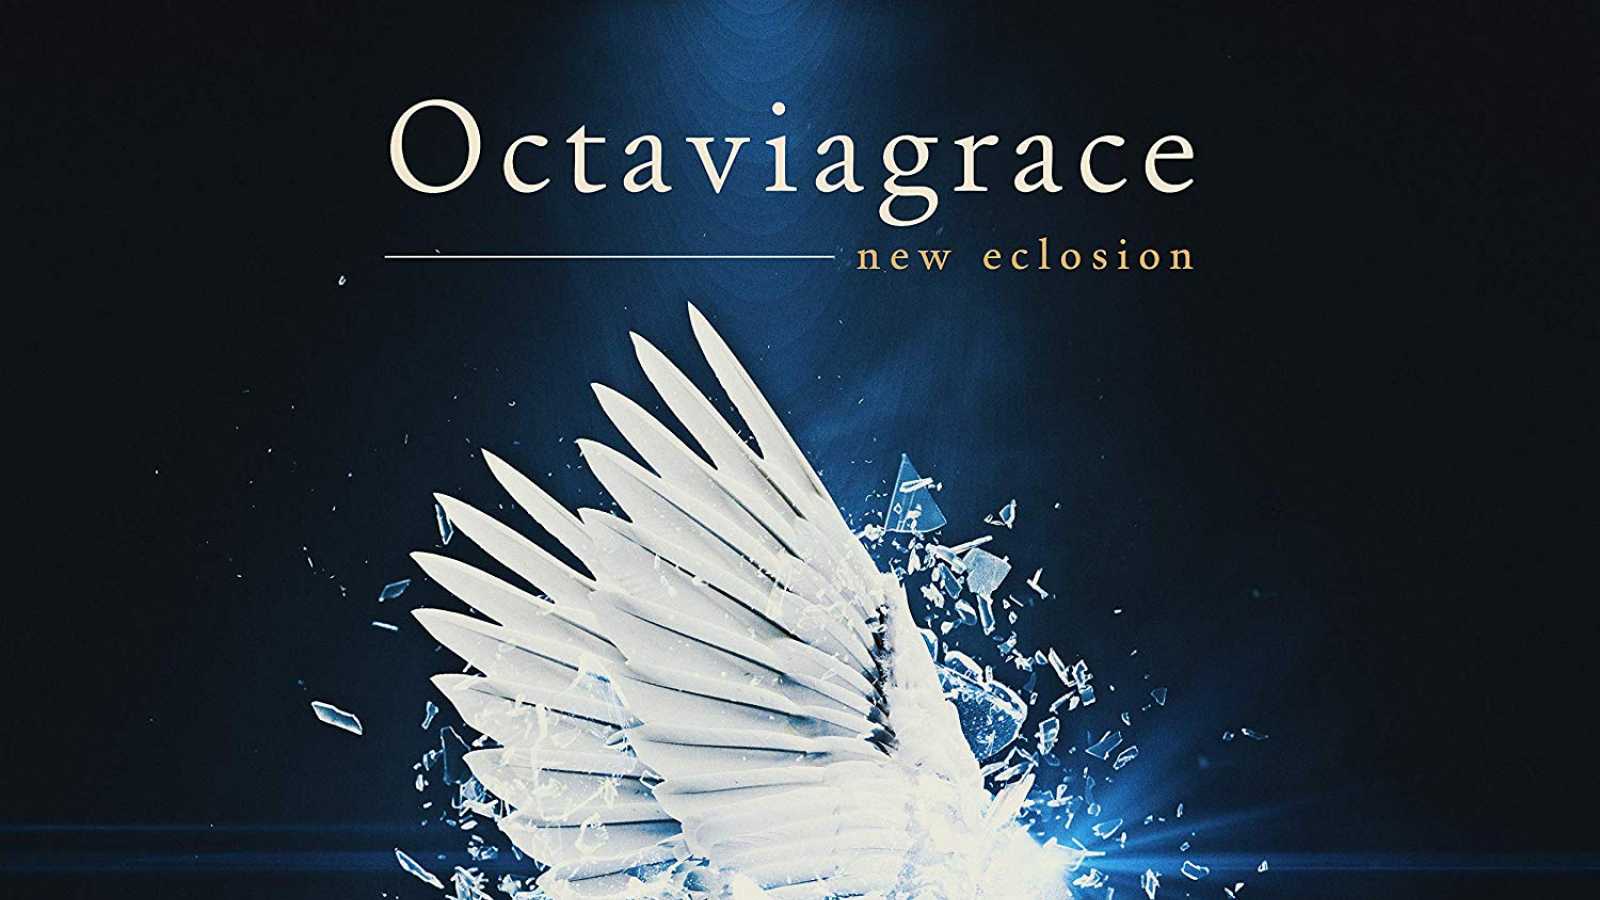 ﻿Octaviagrace - new eclosion © Octaviagrace. All rights reserved.